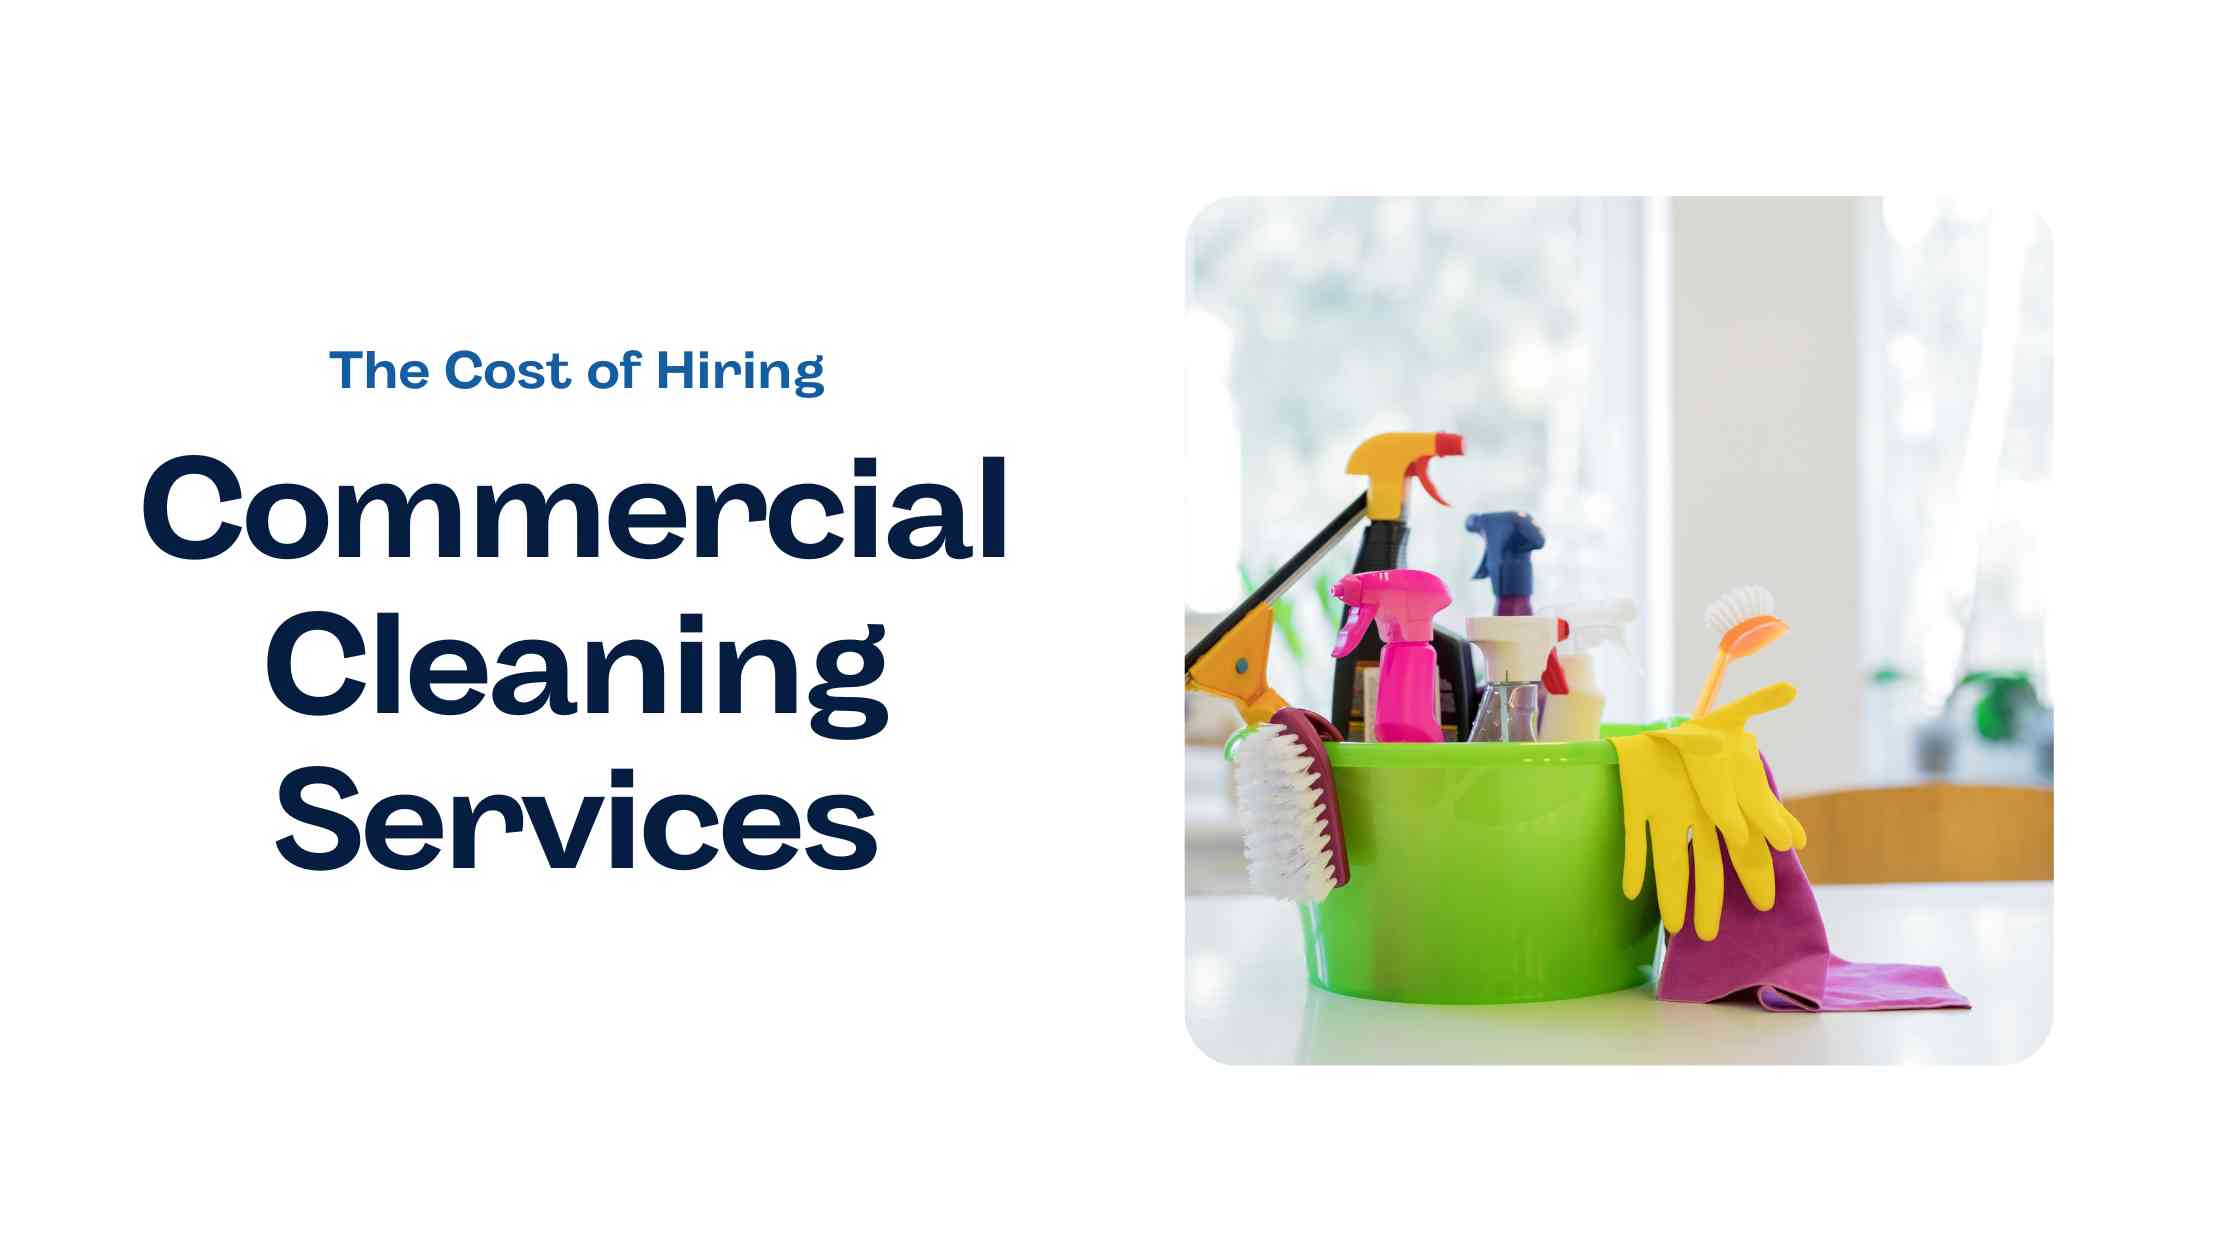 Hiring Commercial Cleaning Services